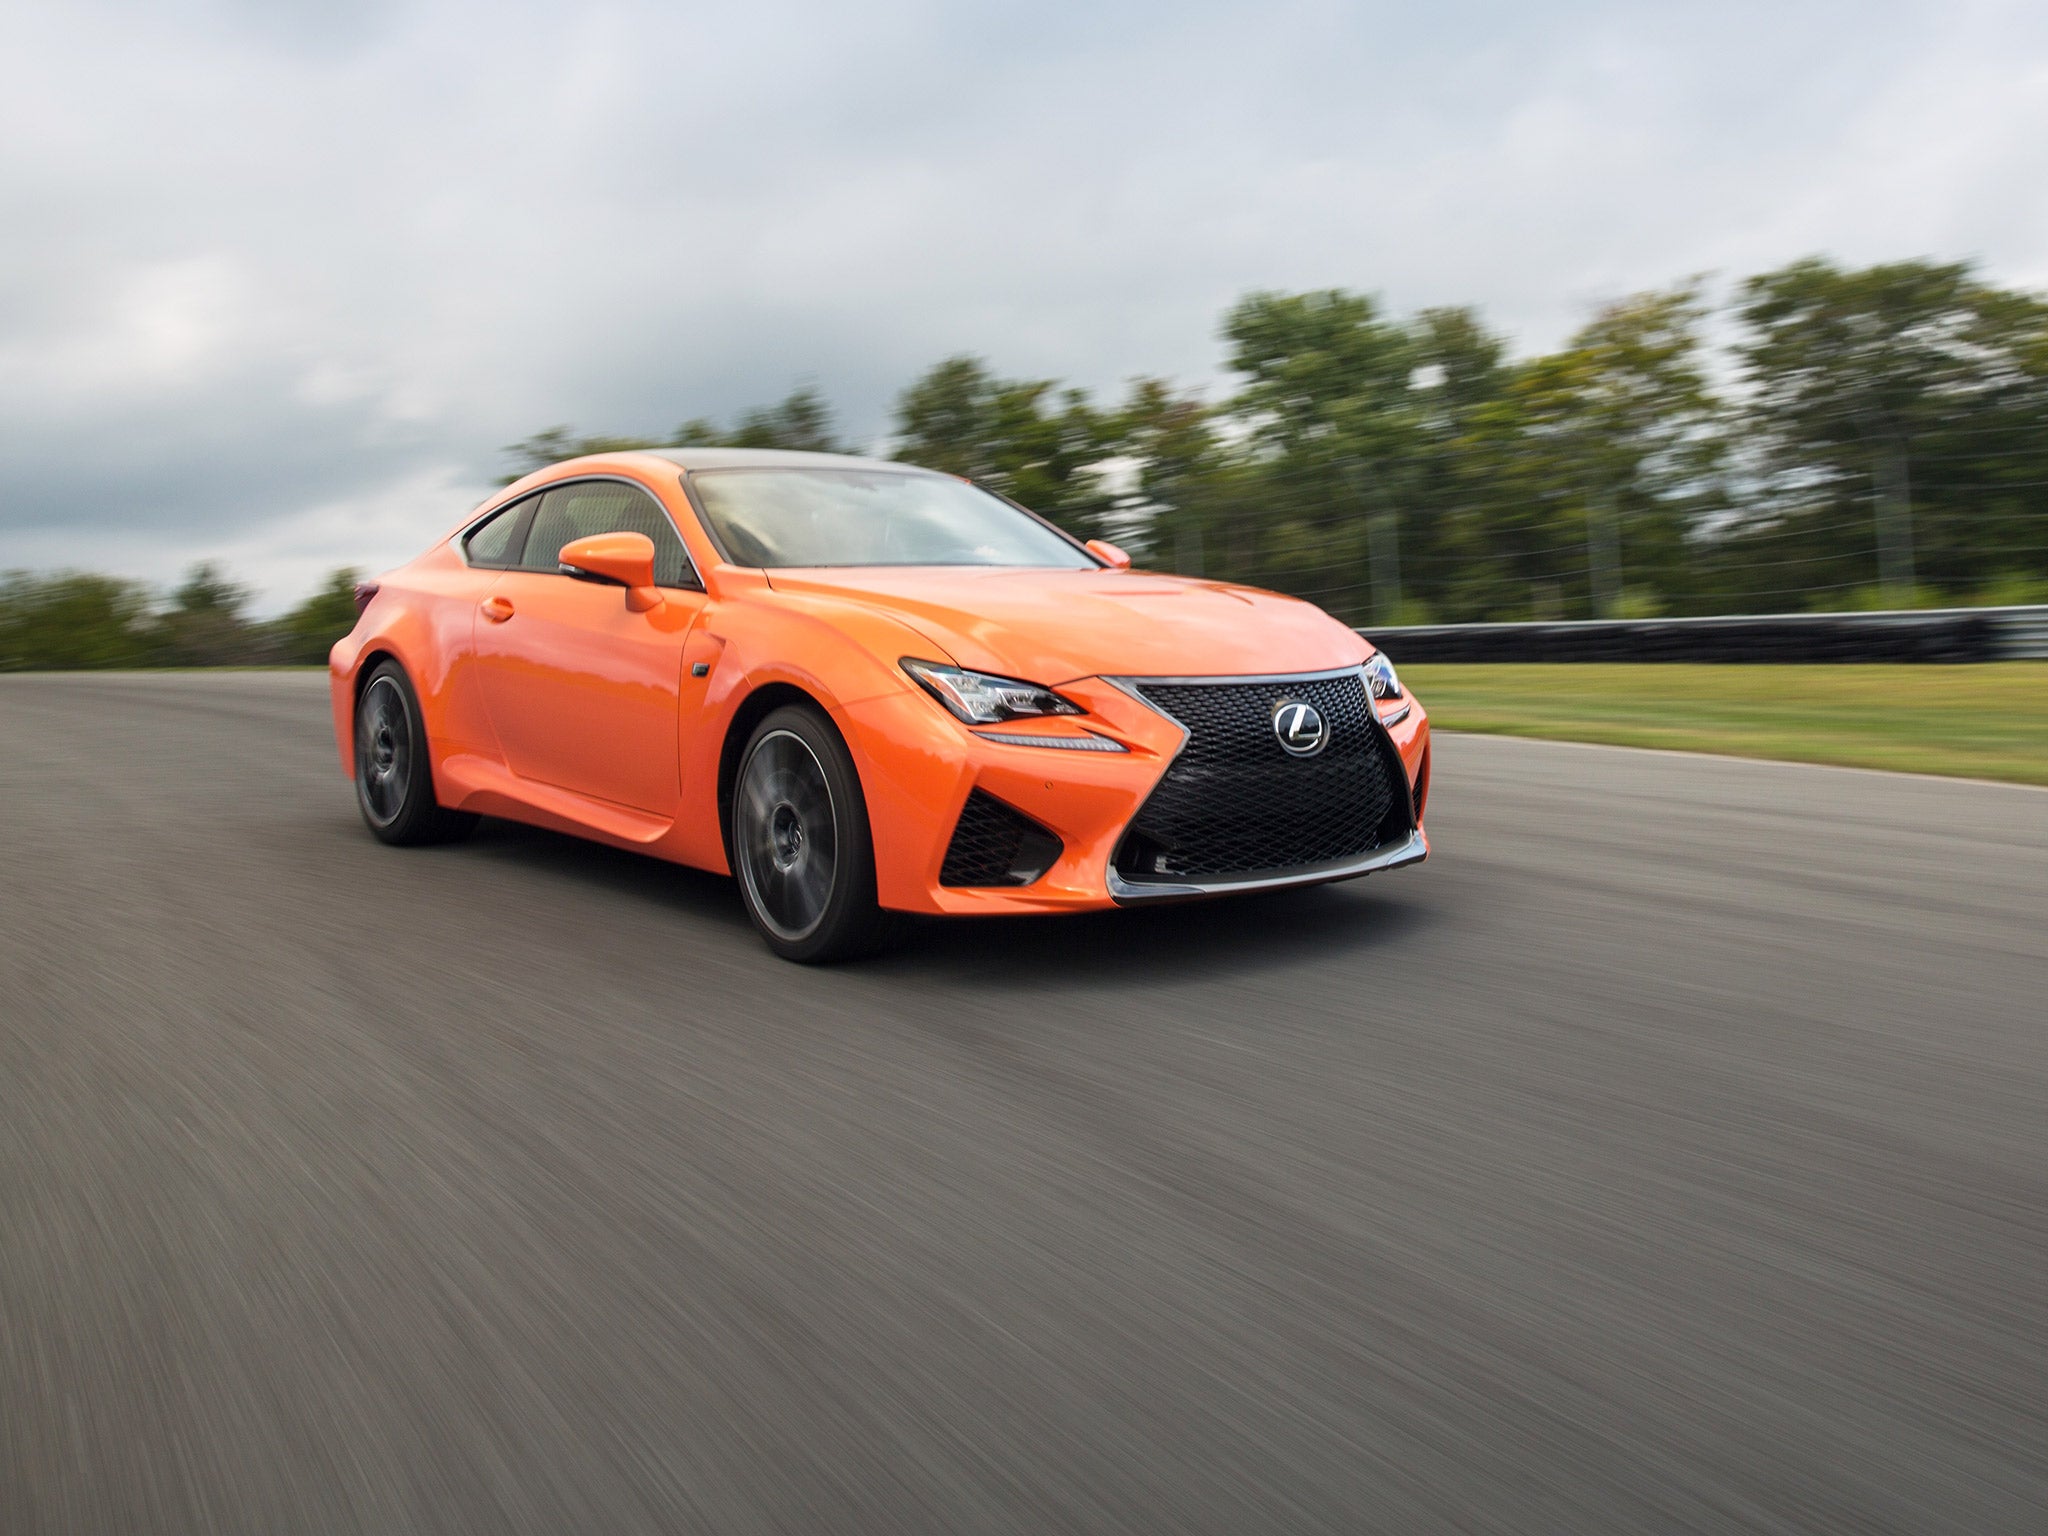 Jeremy and co have all missed the point about the new Lexus RC F